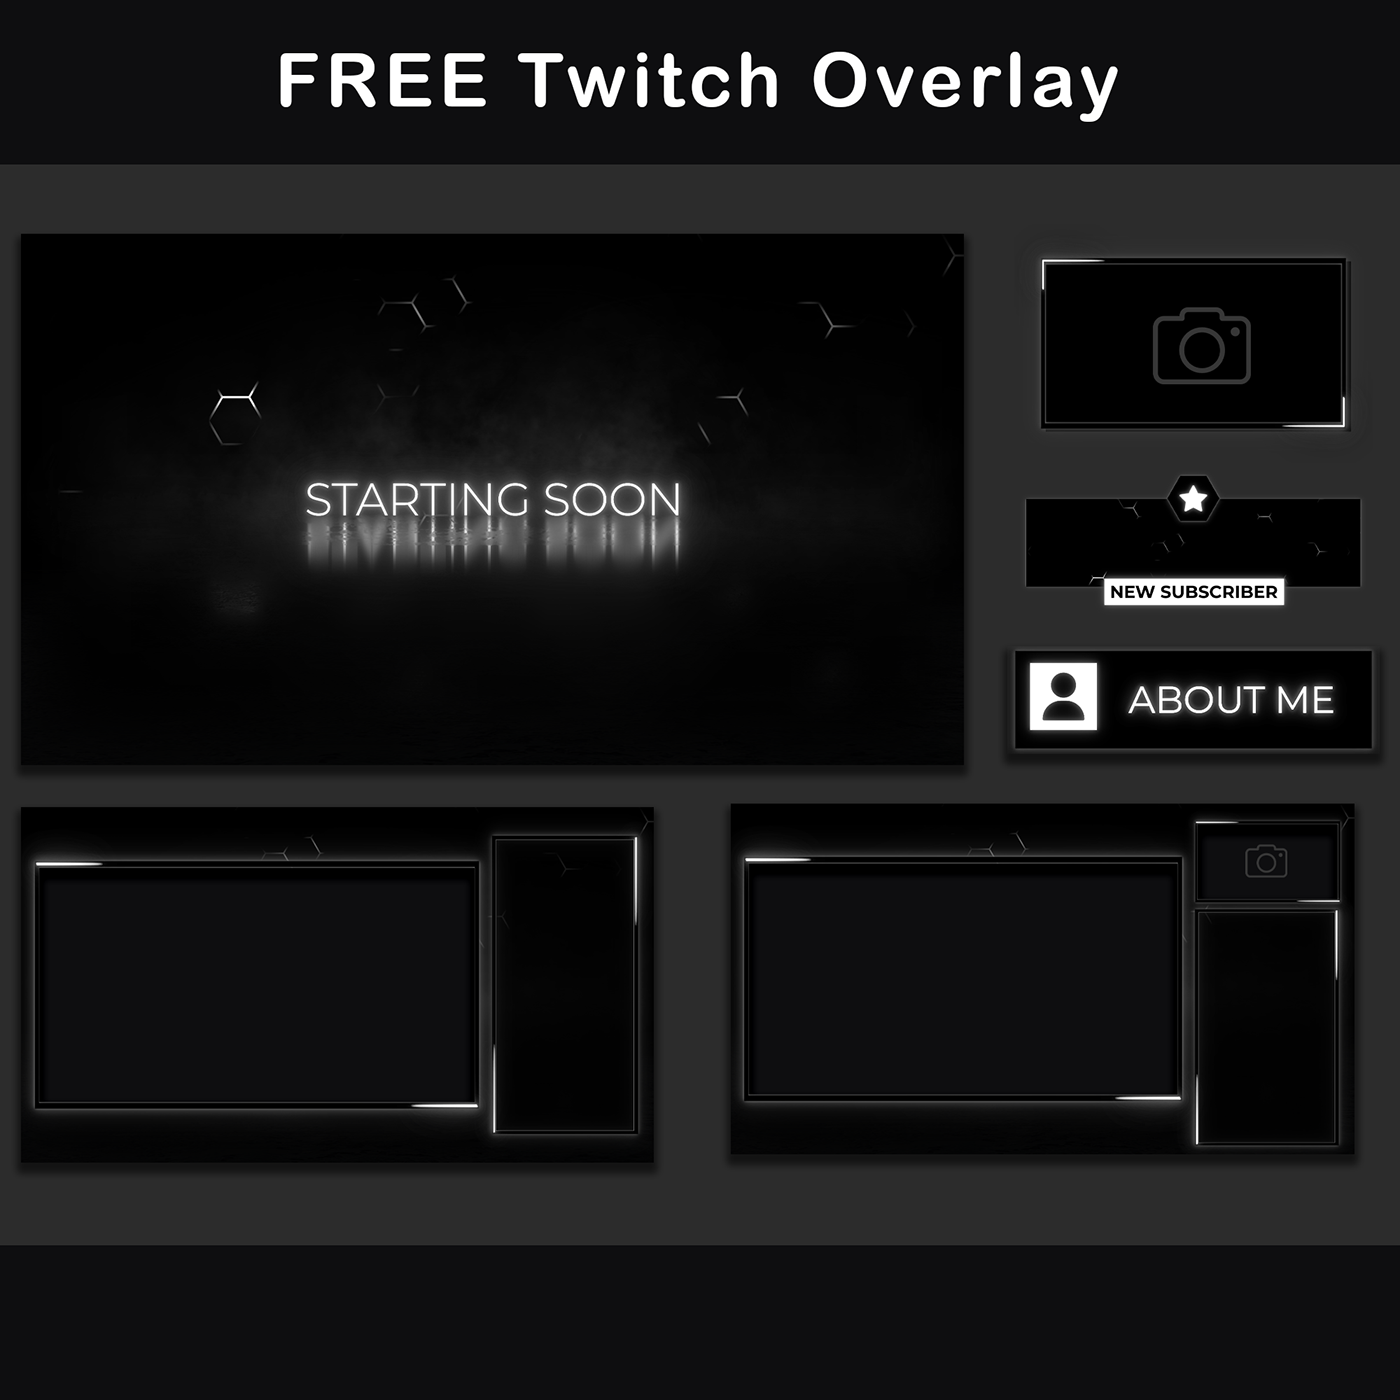 Overview of the free black and white Twitch overlay package for streaming.